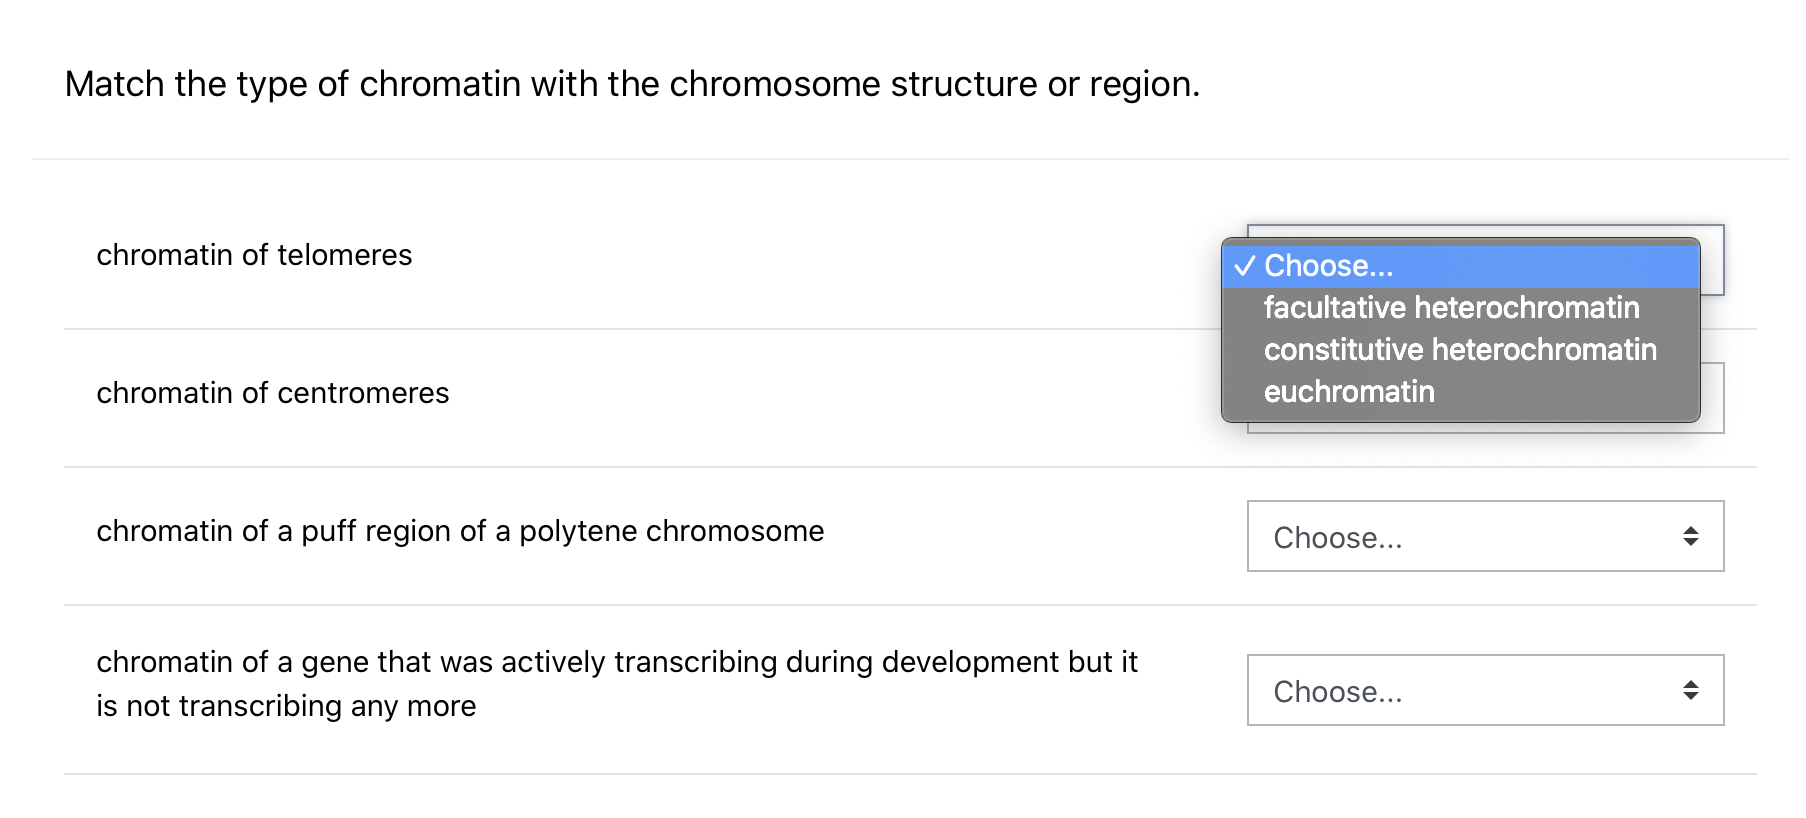 Match the type of chromatin with the chromosome structure or region.
chromatin of telomeres
v Choose...
facultative heterochromatin
constitutive heterochromatin
chromatin of centromeres
eychromatin
